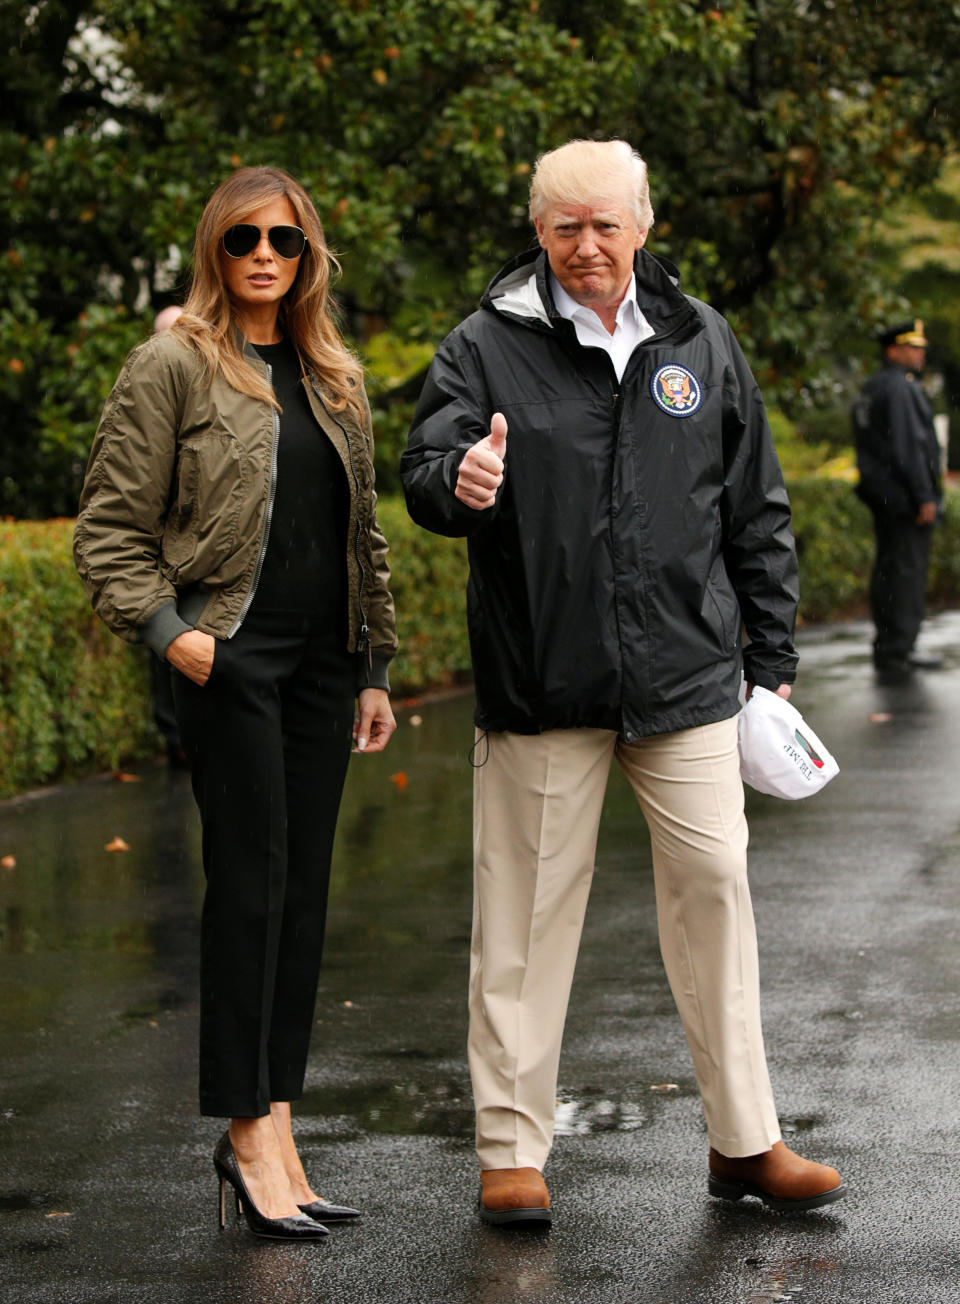 People balked at seeing the first lady in heels for a trip to visit areas affected by Hurricane Harvey, but she changed before touching down in Texas.&nbsp; (Photo: Kevin Lamarque / Reuters)